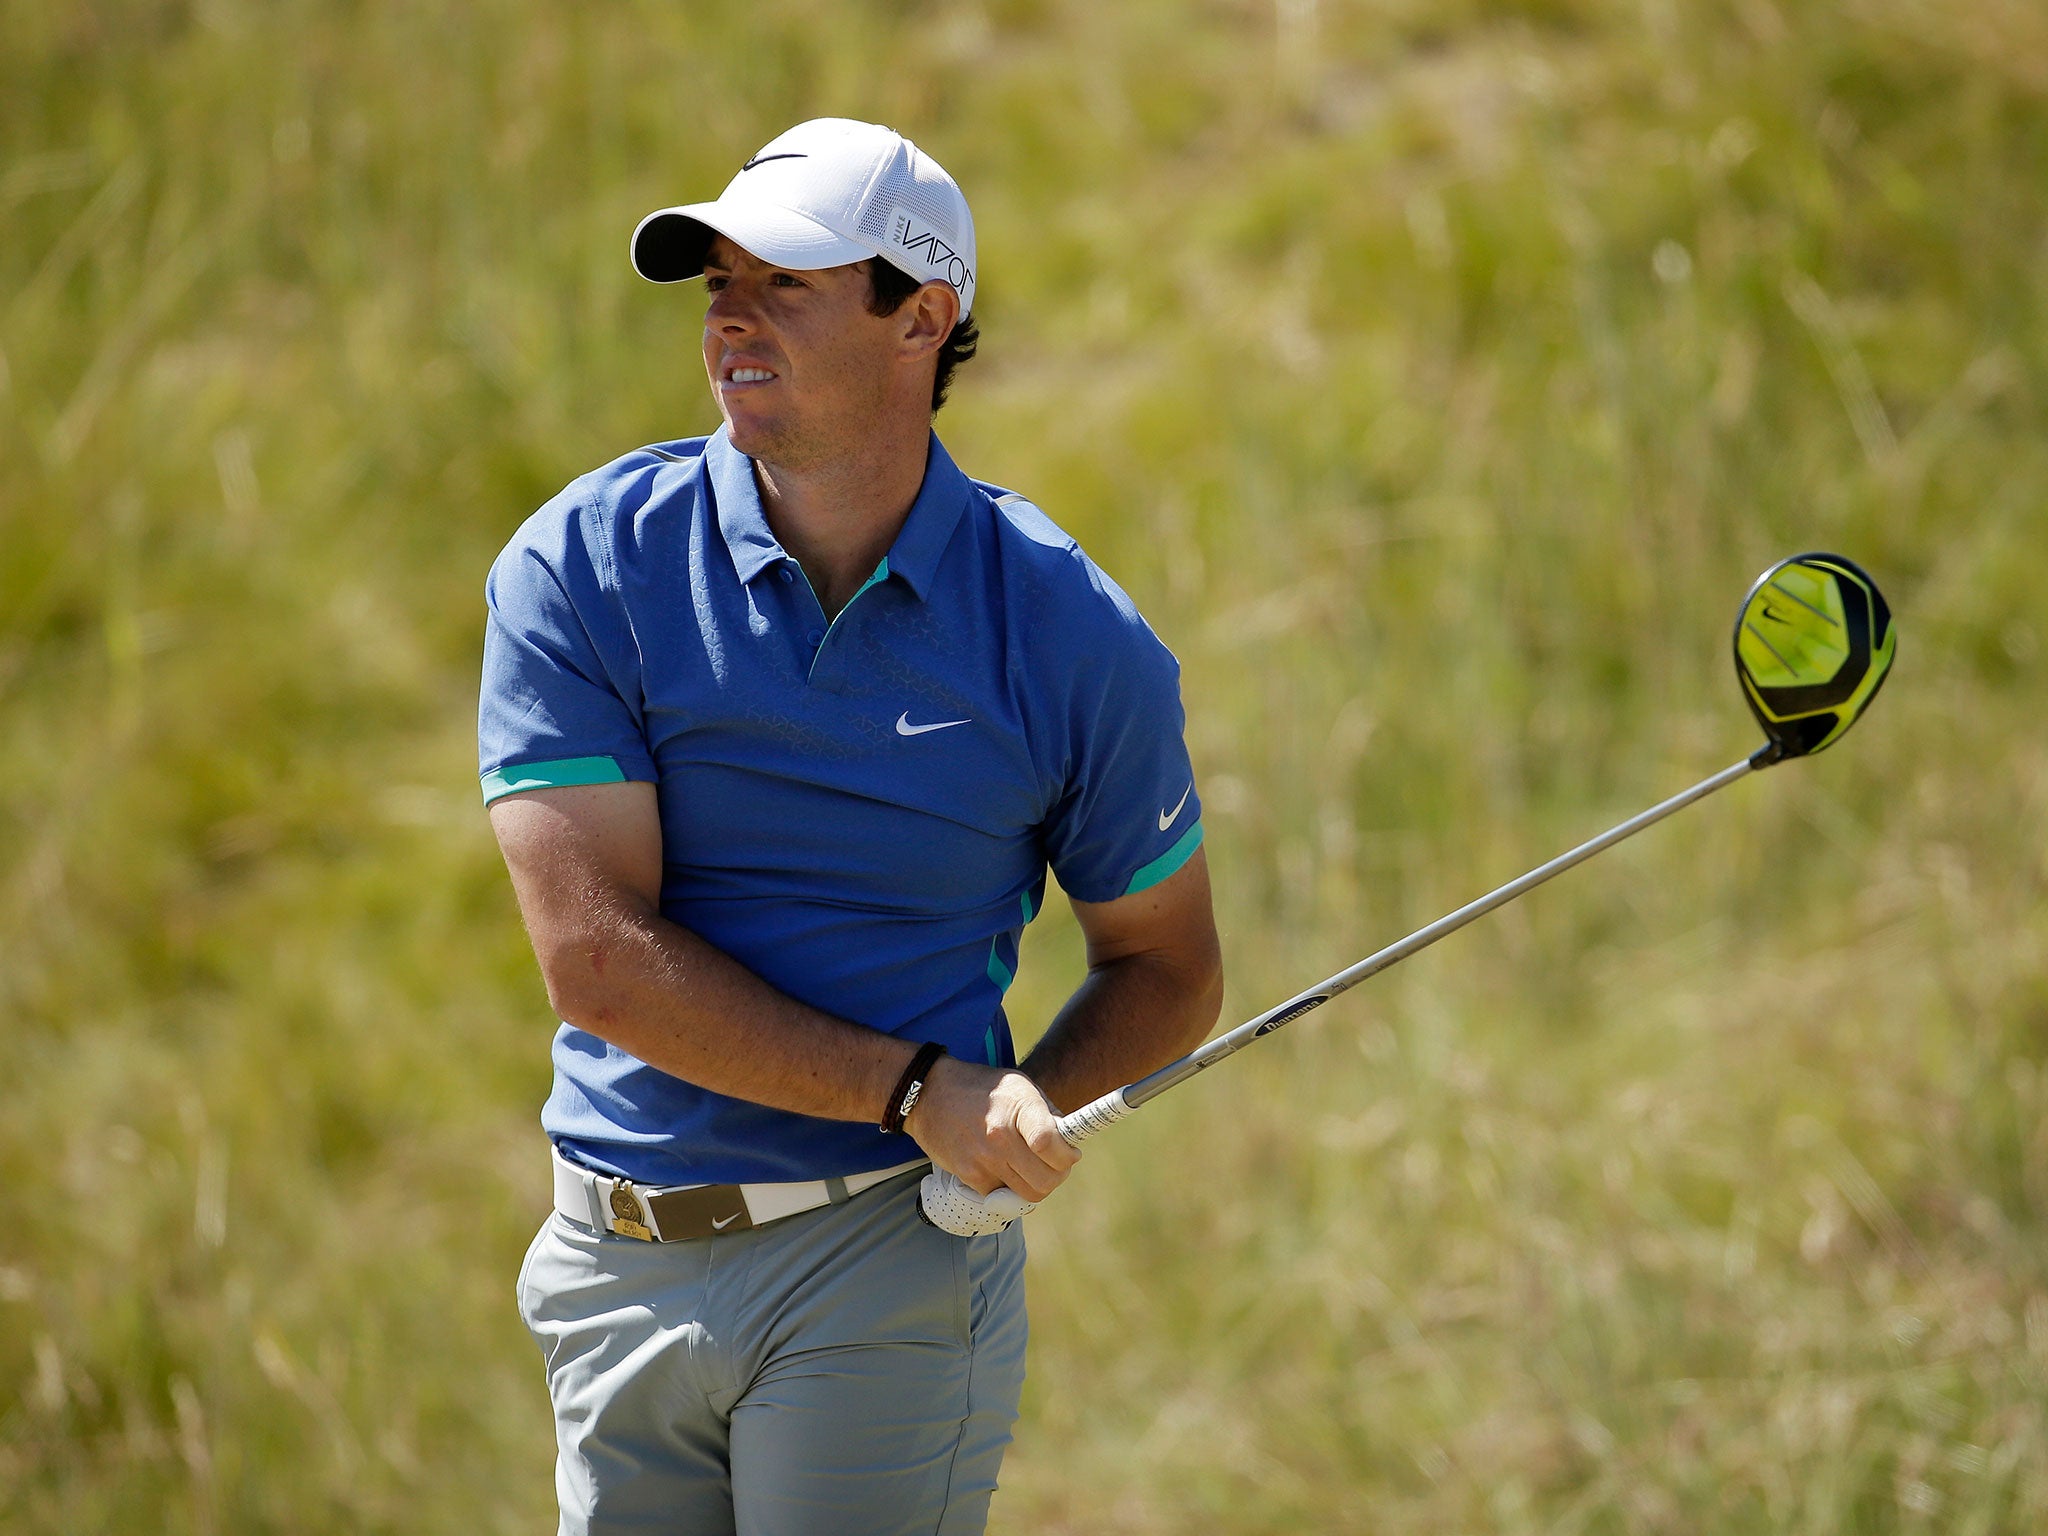 Rory McIlroy, of Northern Ireland, watches his tee shot on the seventh hole during the third round of the U.S. Open